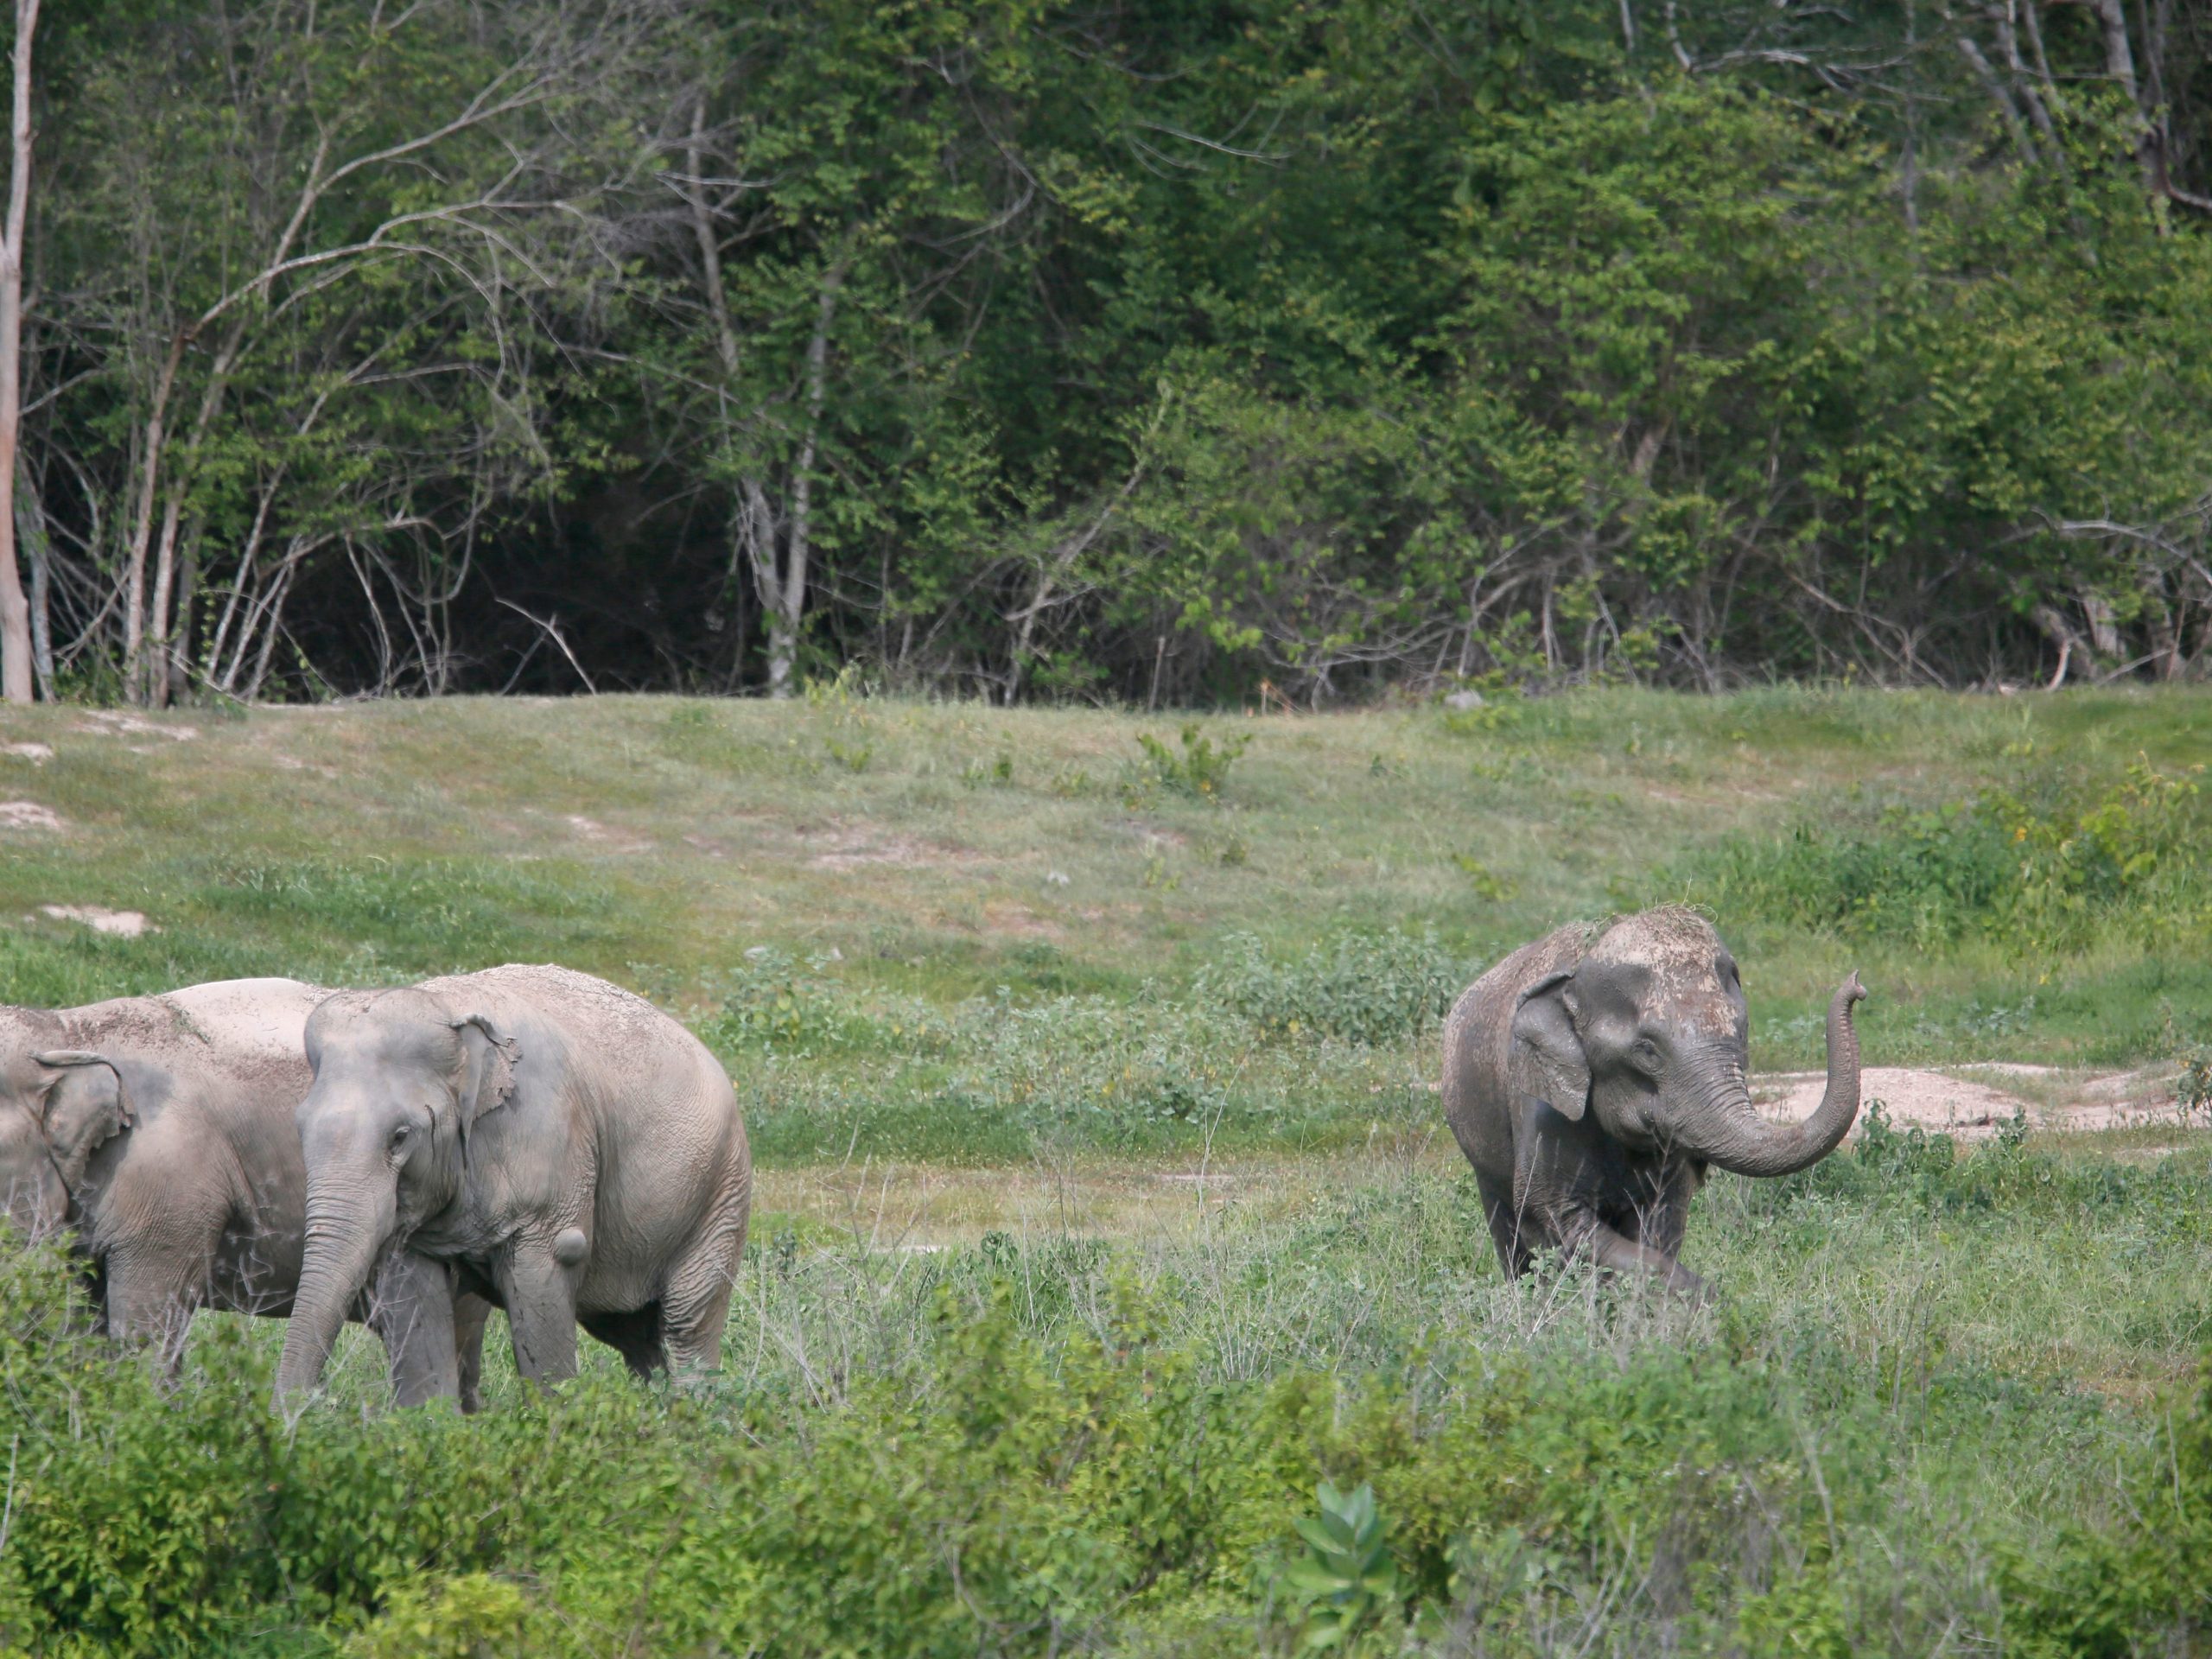 Elephants in Thailand reserve